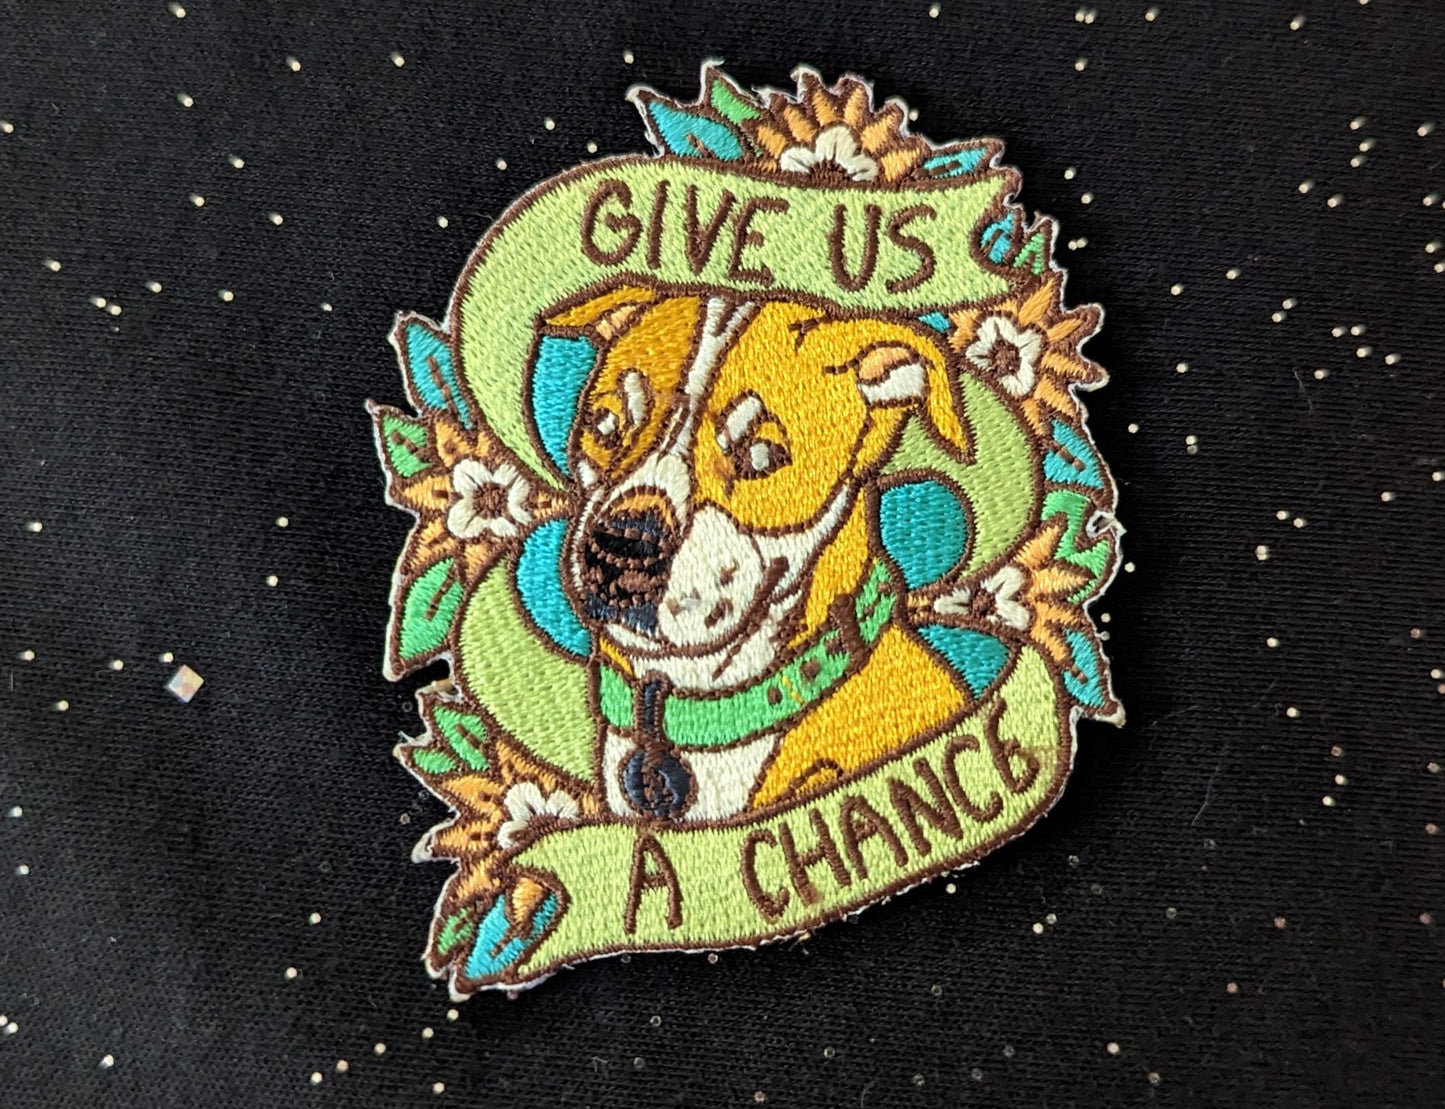 "Give Us A Chance" sticker/pin/patch